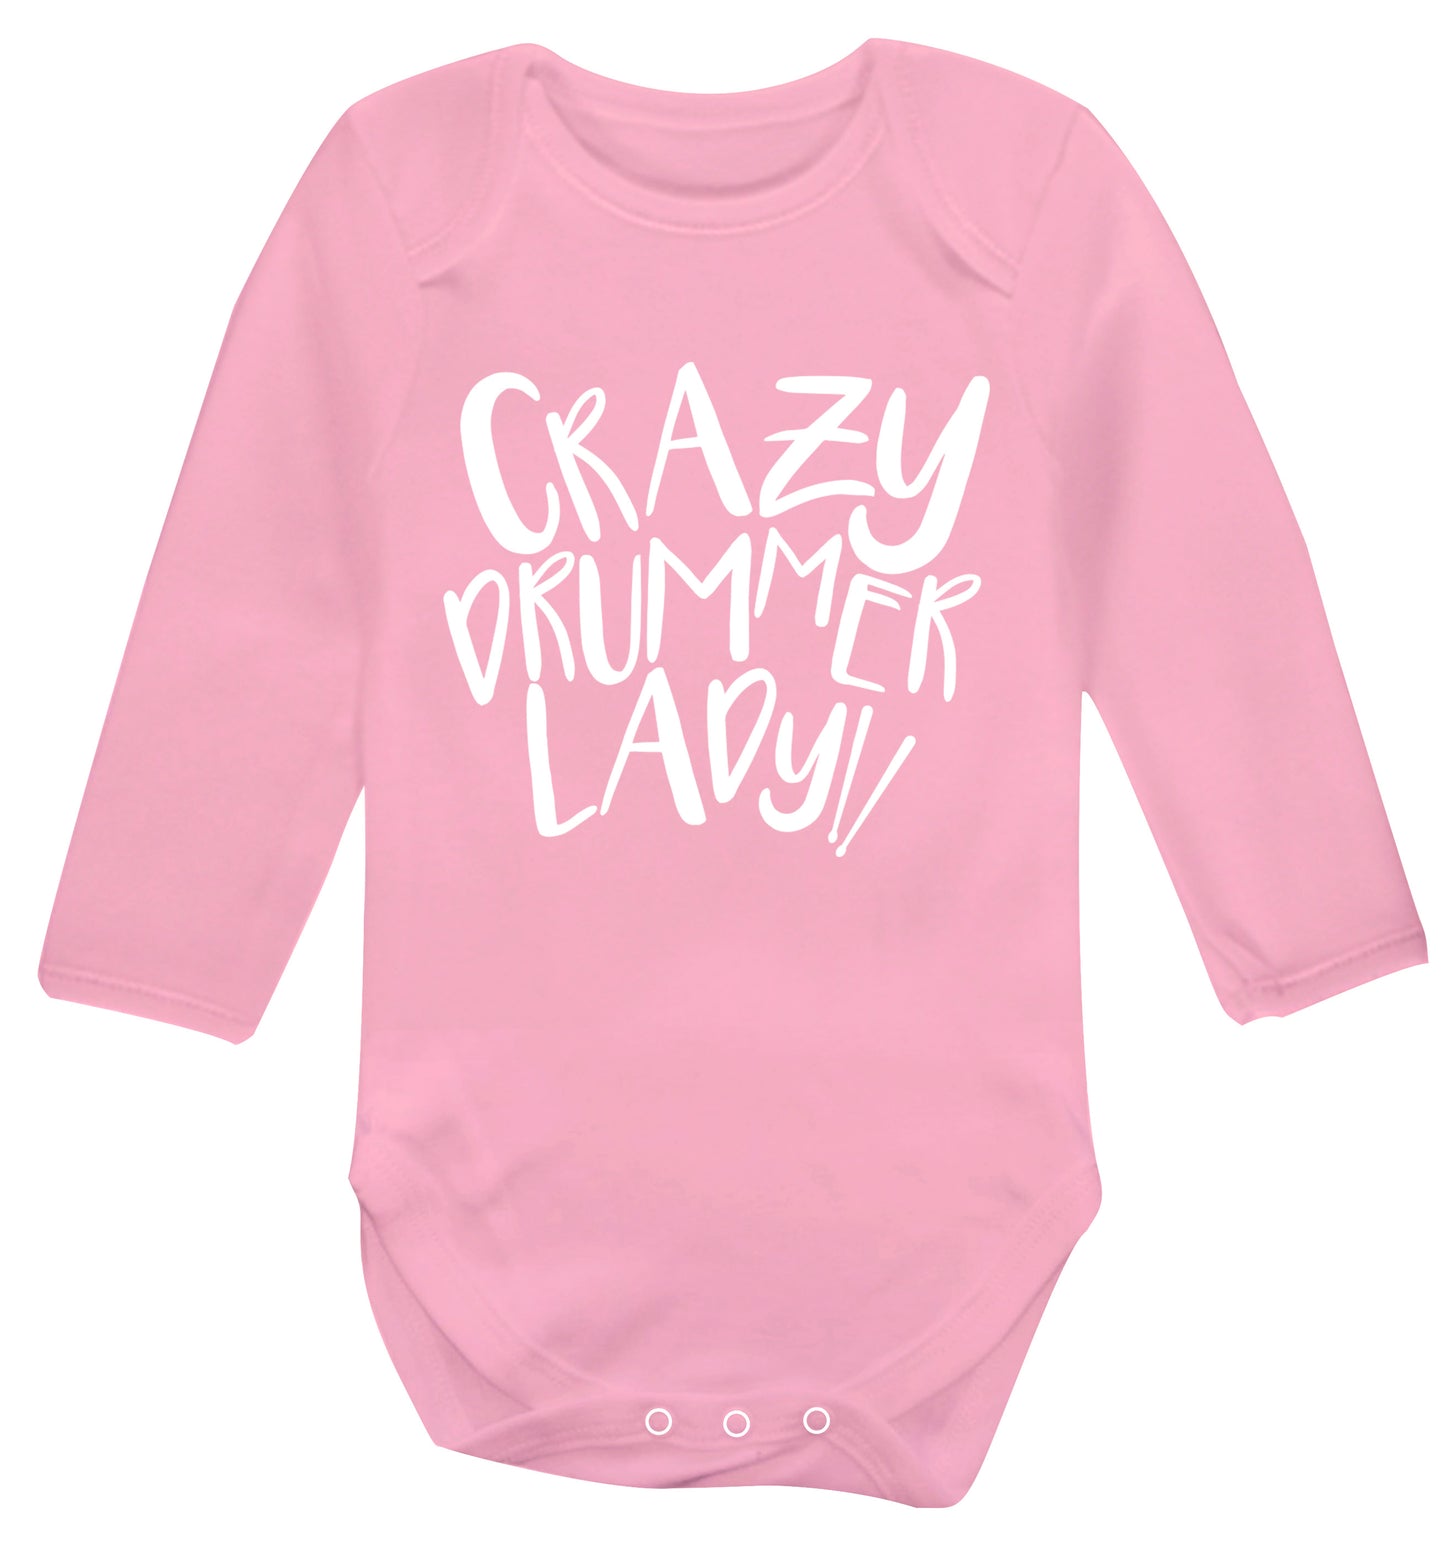 Crazy drummer lady Baby Vest long sleeved pale pink 6-12 months